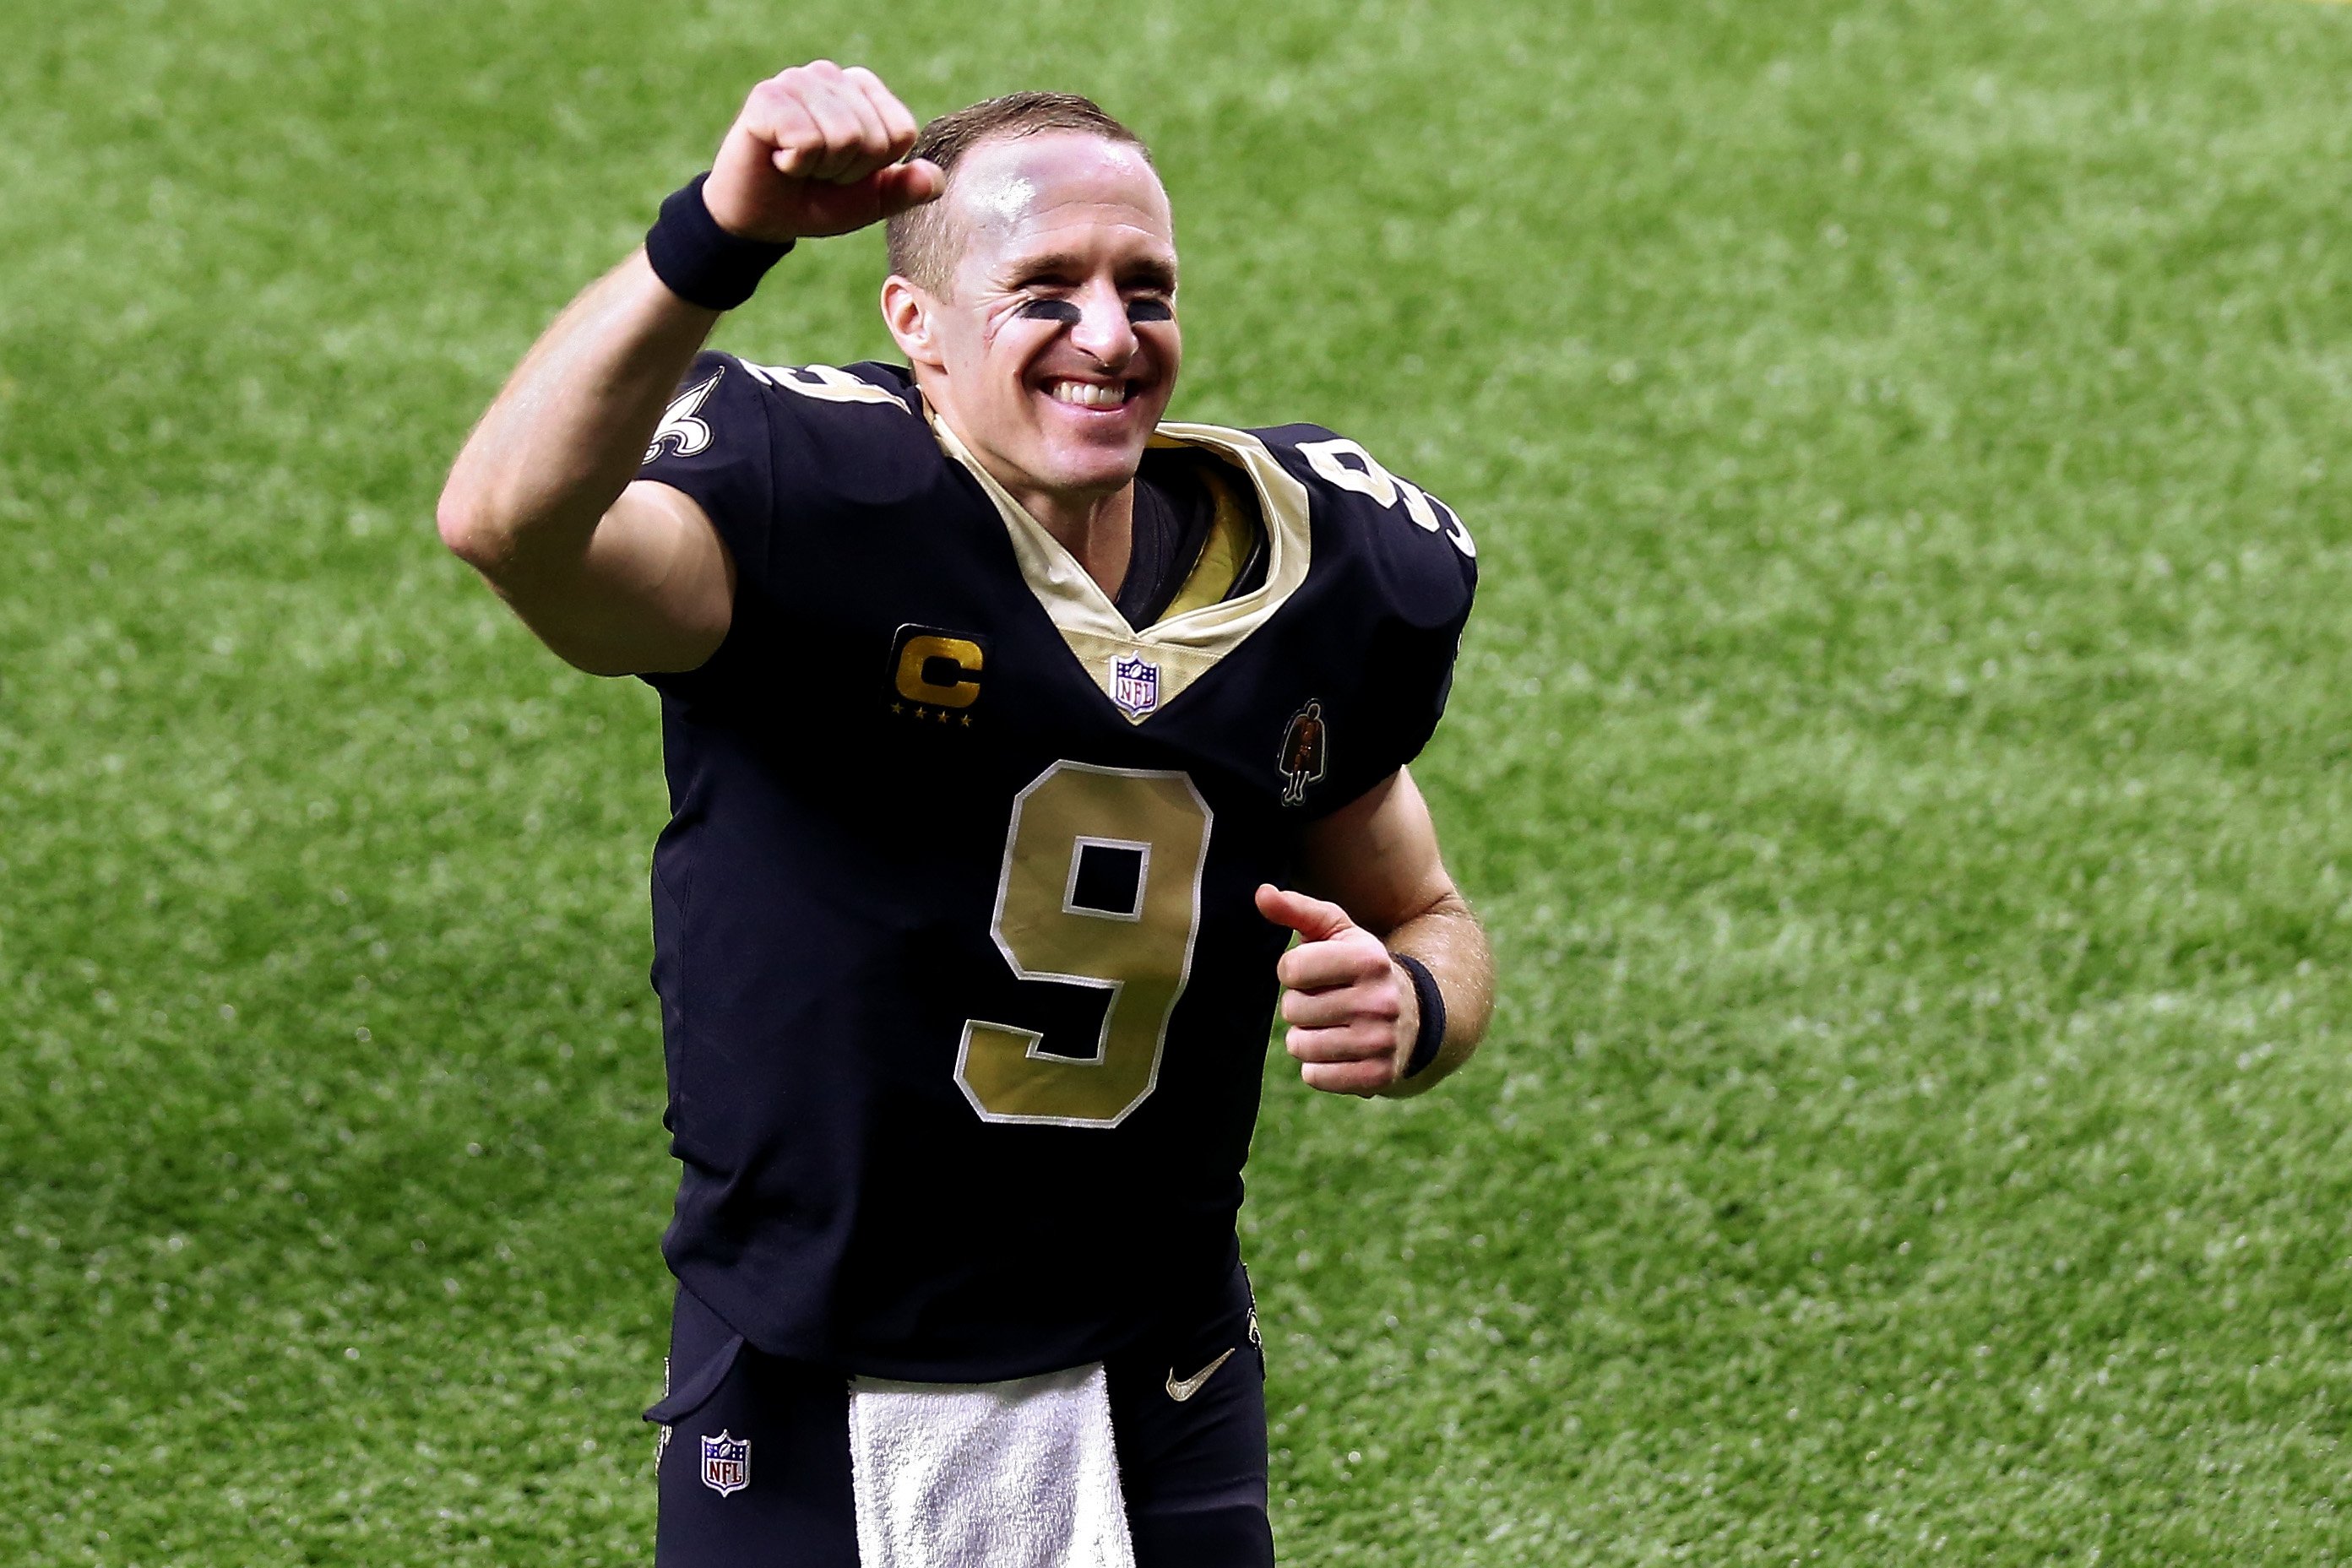 Drew Brees throws fist in the air to celebrate victory over the Carolina Panthers